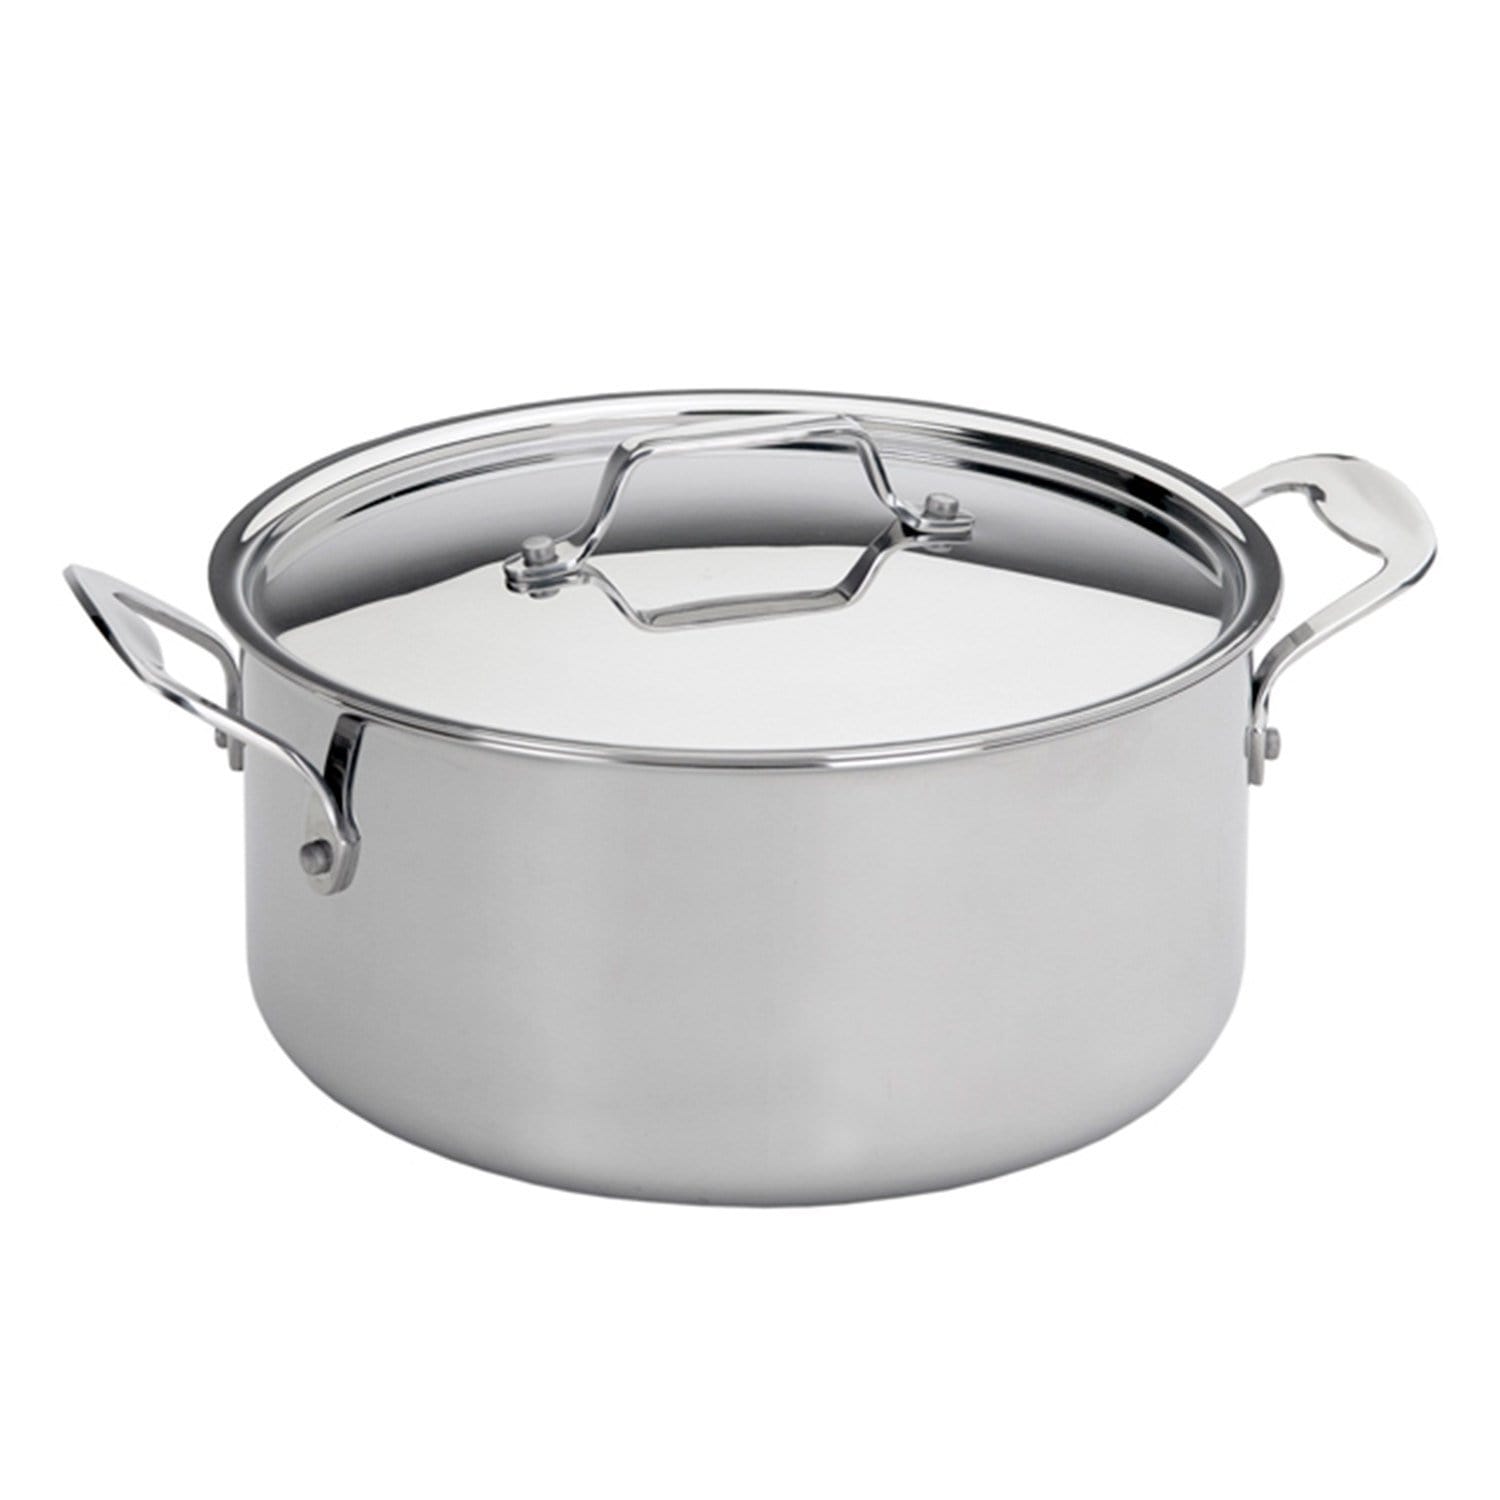 Silampos Supremeprof Casserole with Lid - Silver, 24 cm - 639002BG1024 - Jashanmal Home